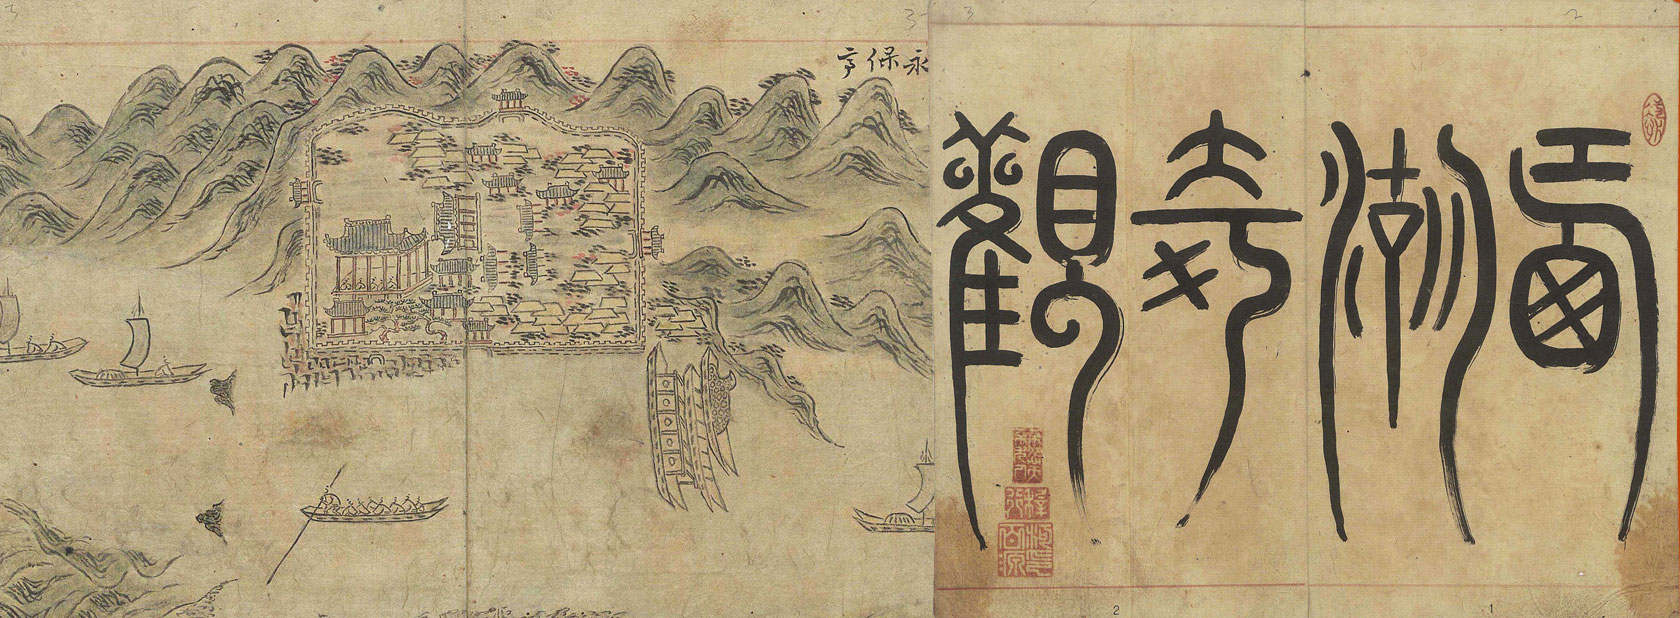 Haeyousihwachub - Haeyousihwachub is a sketchbook of Gunam including his drawings in 1842, when he was exiled to Boryung.